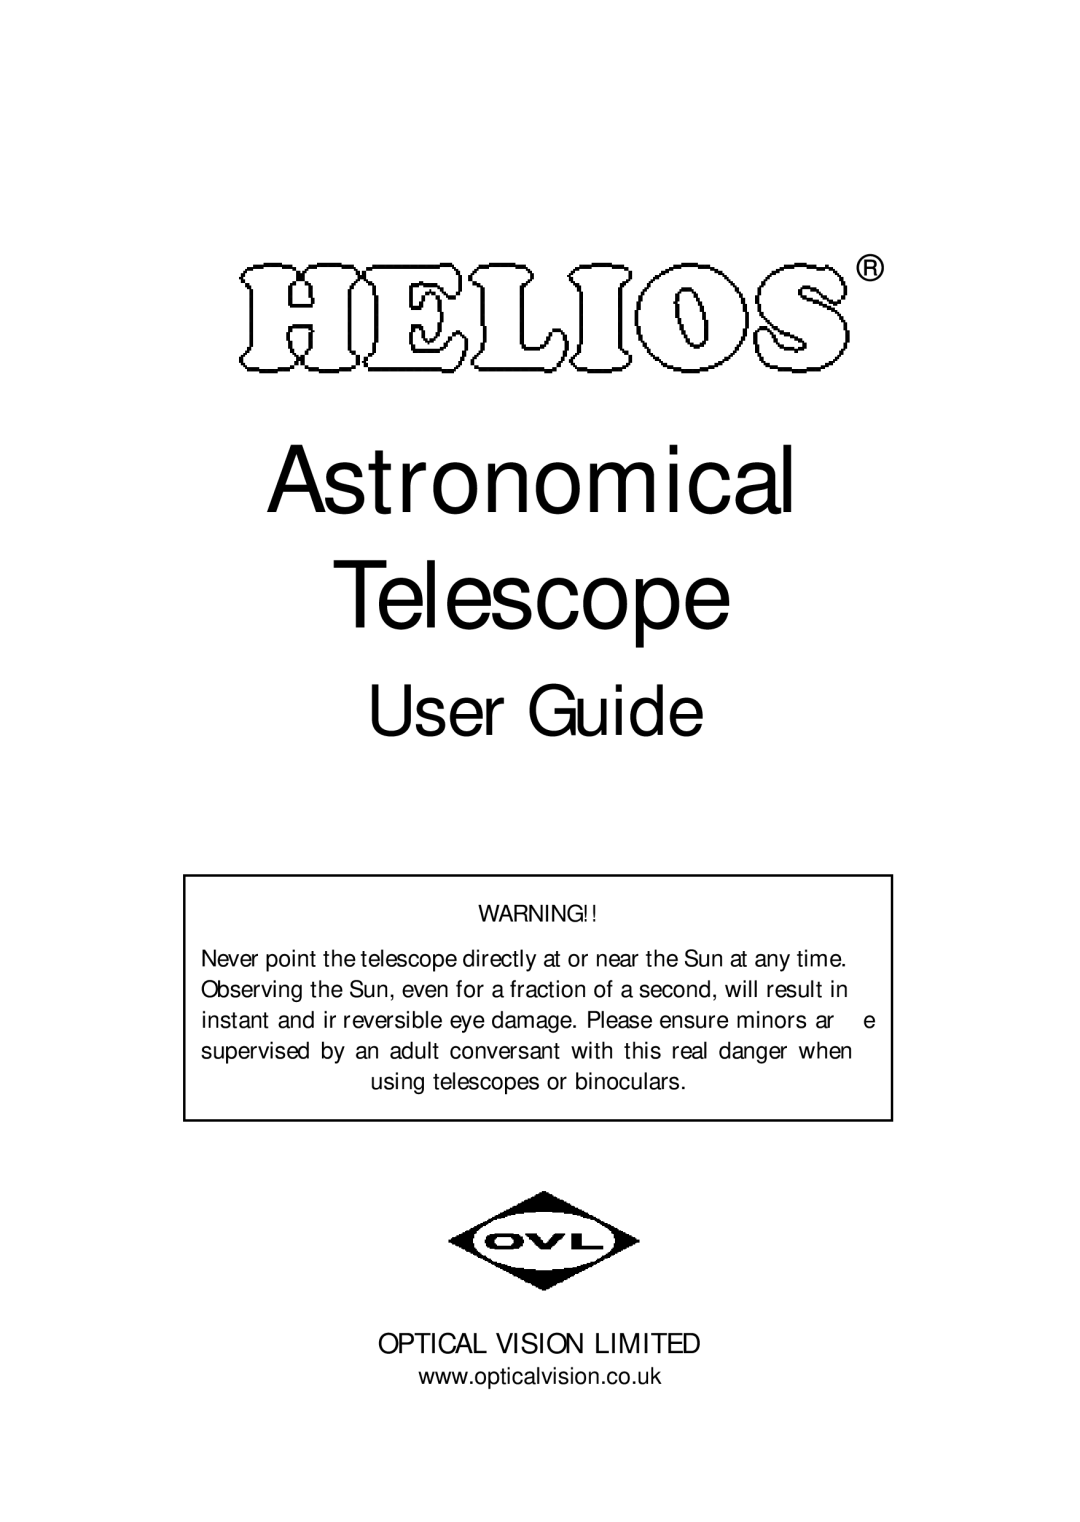 Orion 9877 manual User Guide, Optical Vision Limited, using telescopes or binoculars, Astronomical Telescope 